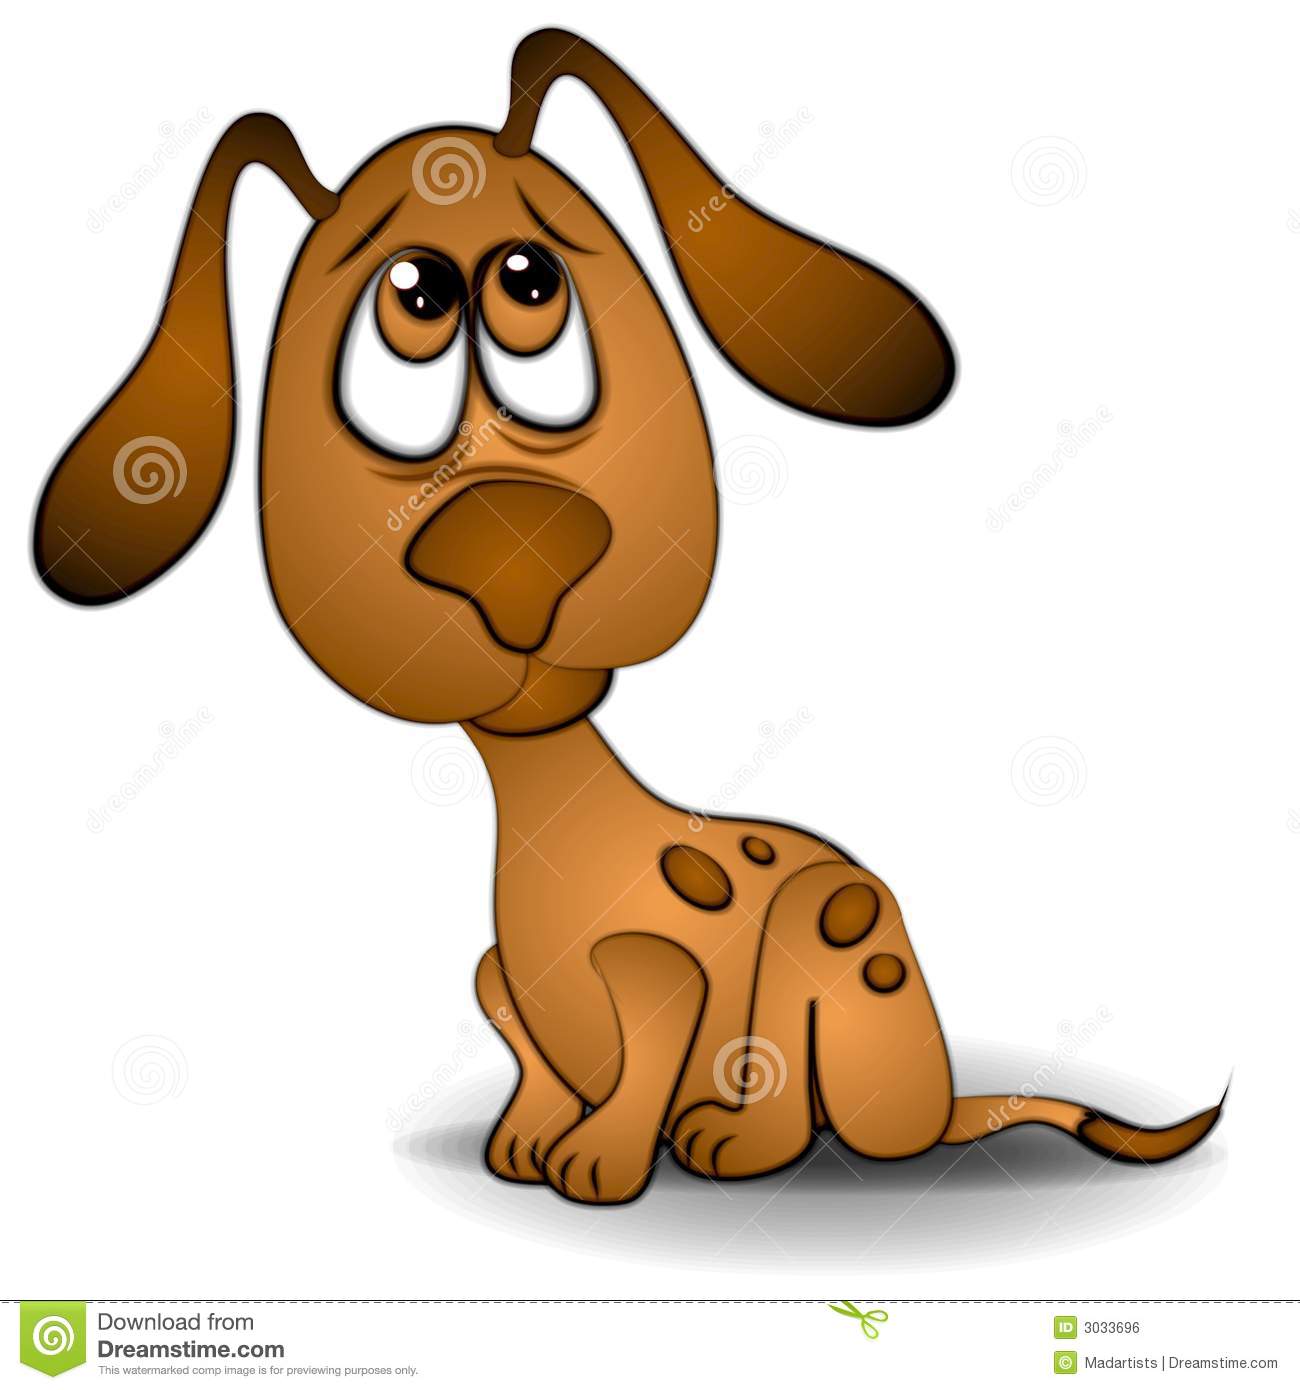 Clip Art Illustration Of A Very Sad Or Scared Looking Dog Or Puppy